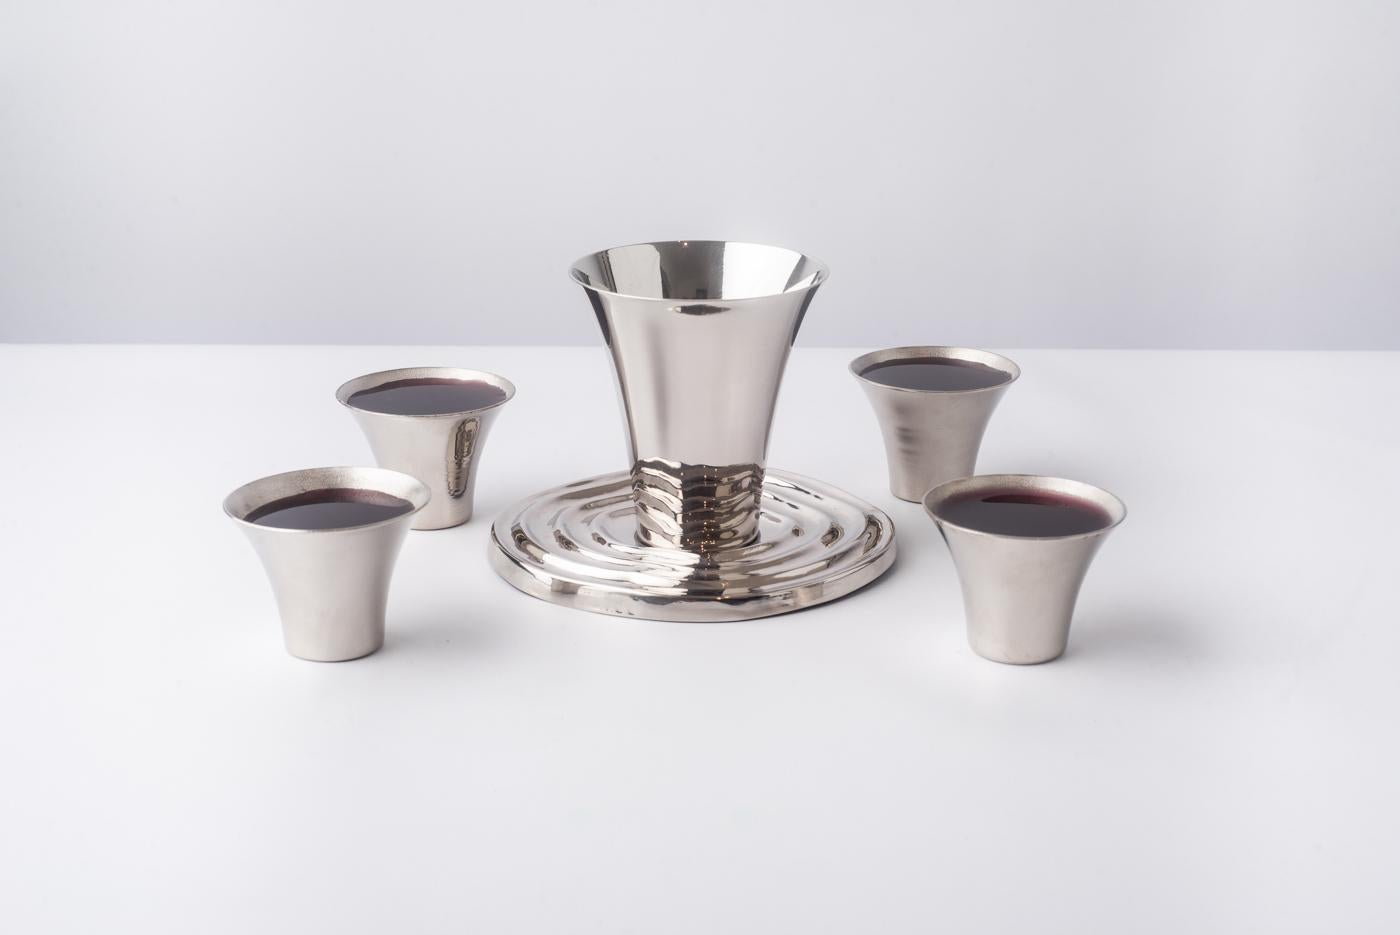 Elevate your home bar with this exquisite set of four Spill hand-spun cups, crafted from lustrous nickel-plated brass. The perfect choice for sampling premium spirits or indulging in elegant cocktails, these Spill cups exude sophistication and